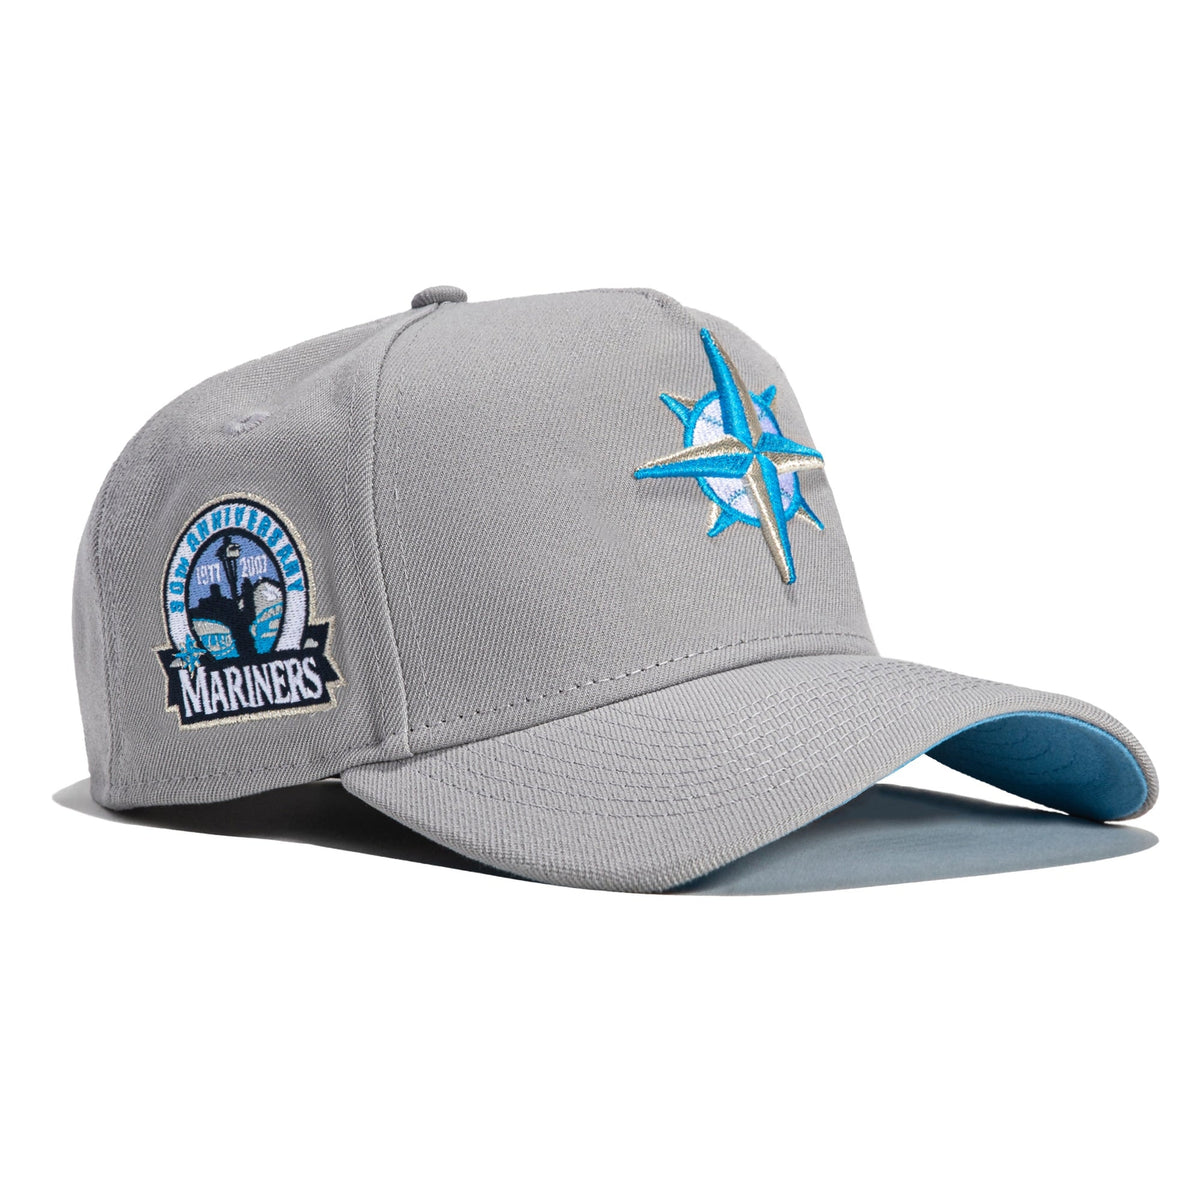 New Era 9FORTY A-Frame Seattle Mariners Snapback Hat - Light Blue